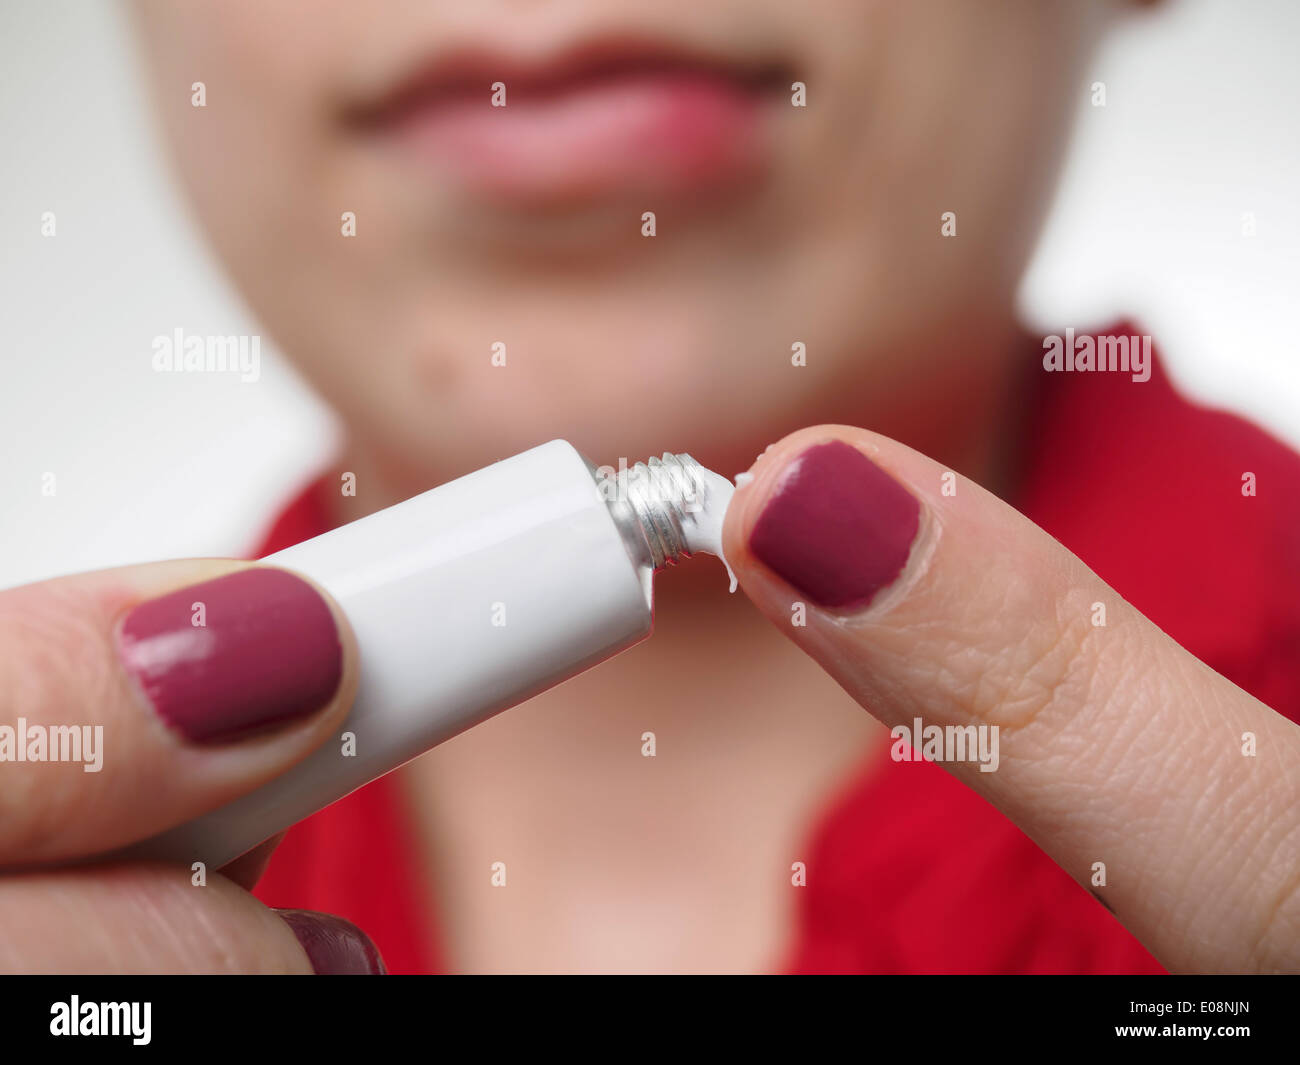 Young woman putting ointment to treat herpes simplex on her lip Stock Photo